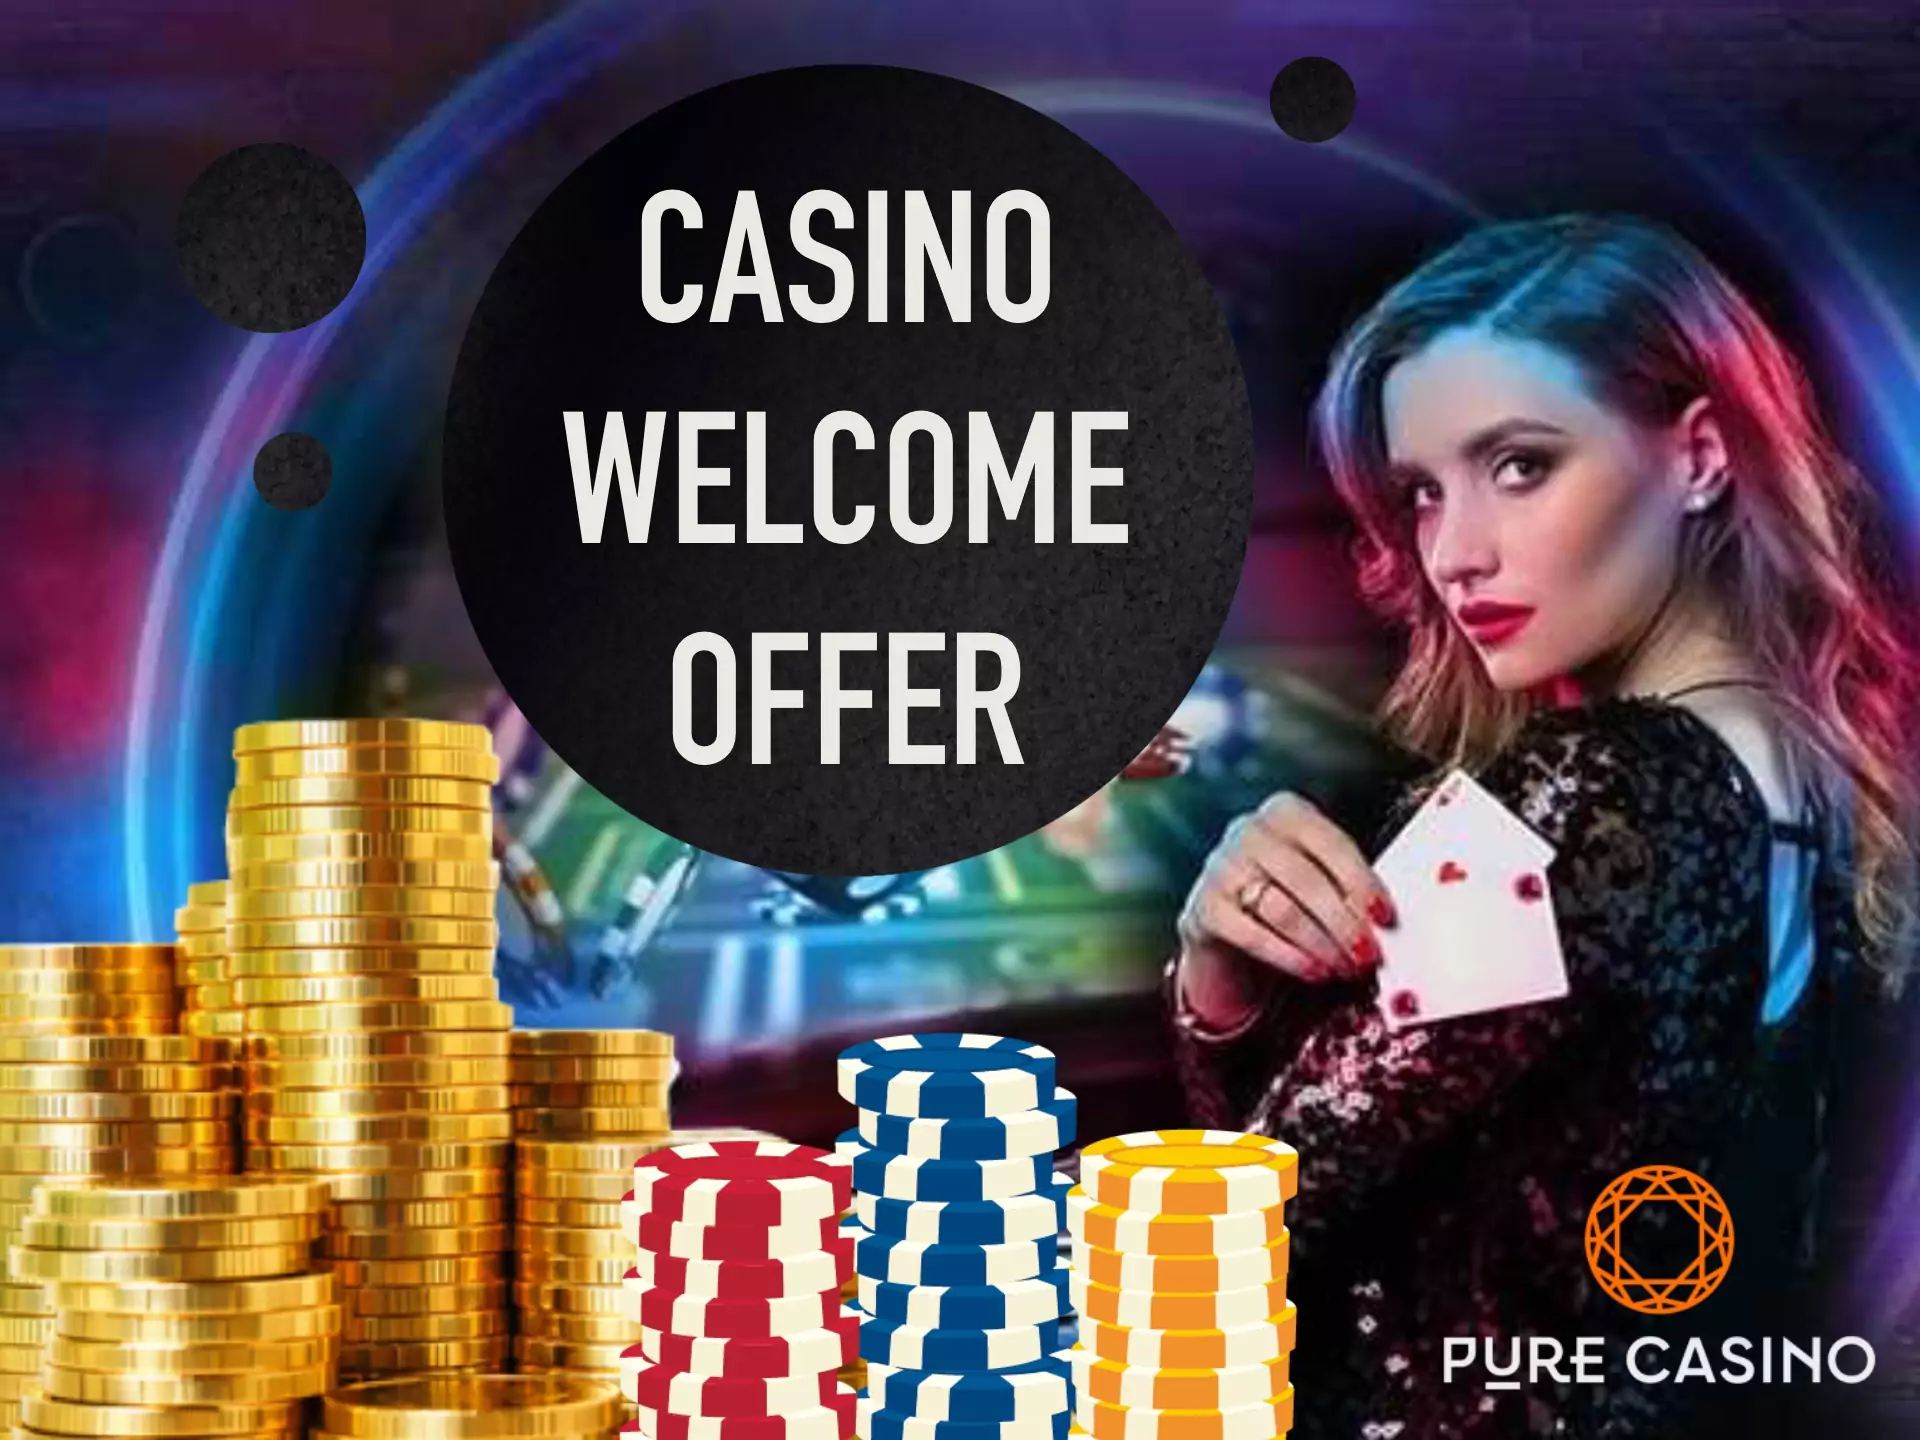 Spend you bonus money on casino games and try to win more.